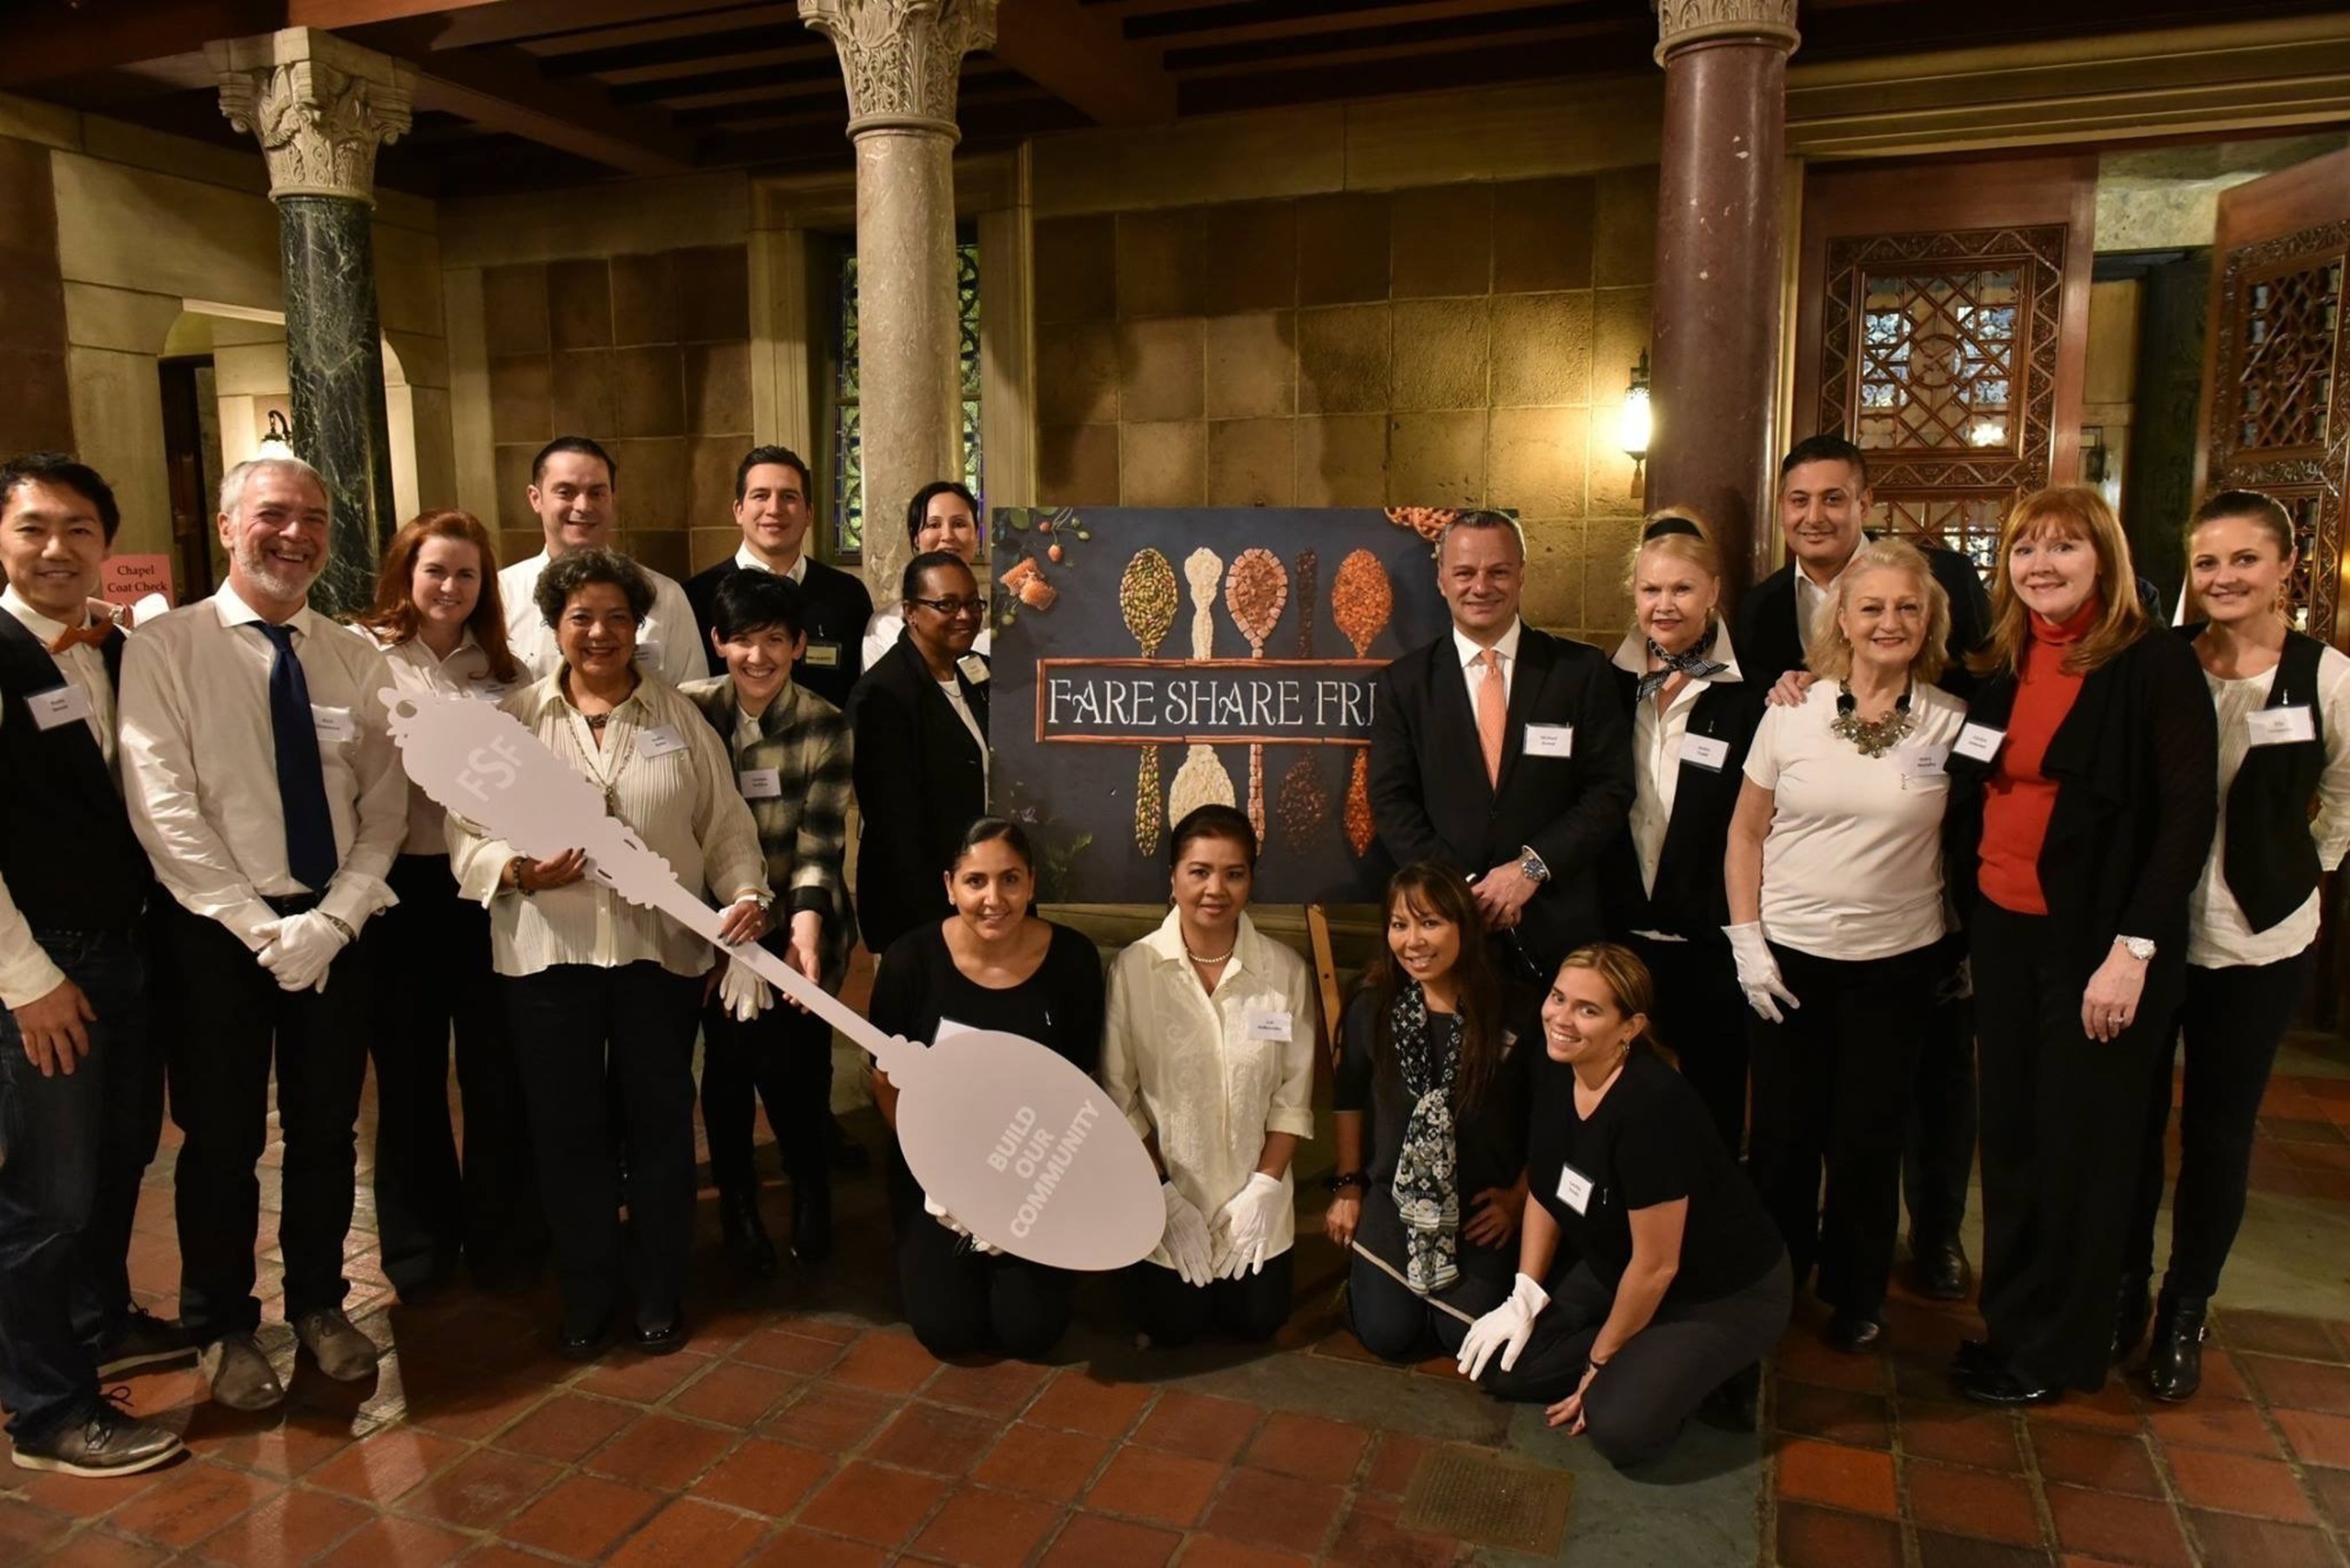 Applause Tickets donates to a charitable fund established by the New York City Association of Hotel Concierges and participates in community service activities like Fare Share Friday serving Thanksgiving dinner to those in need.